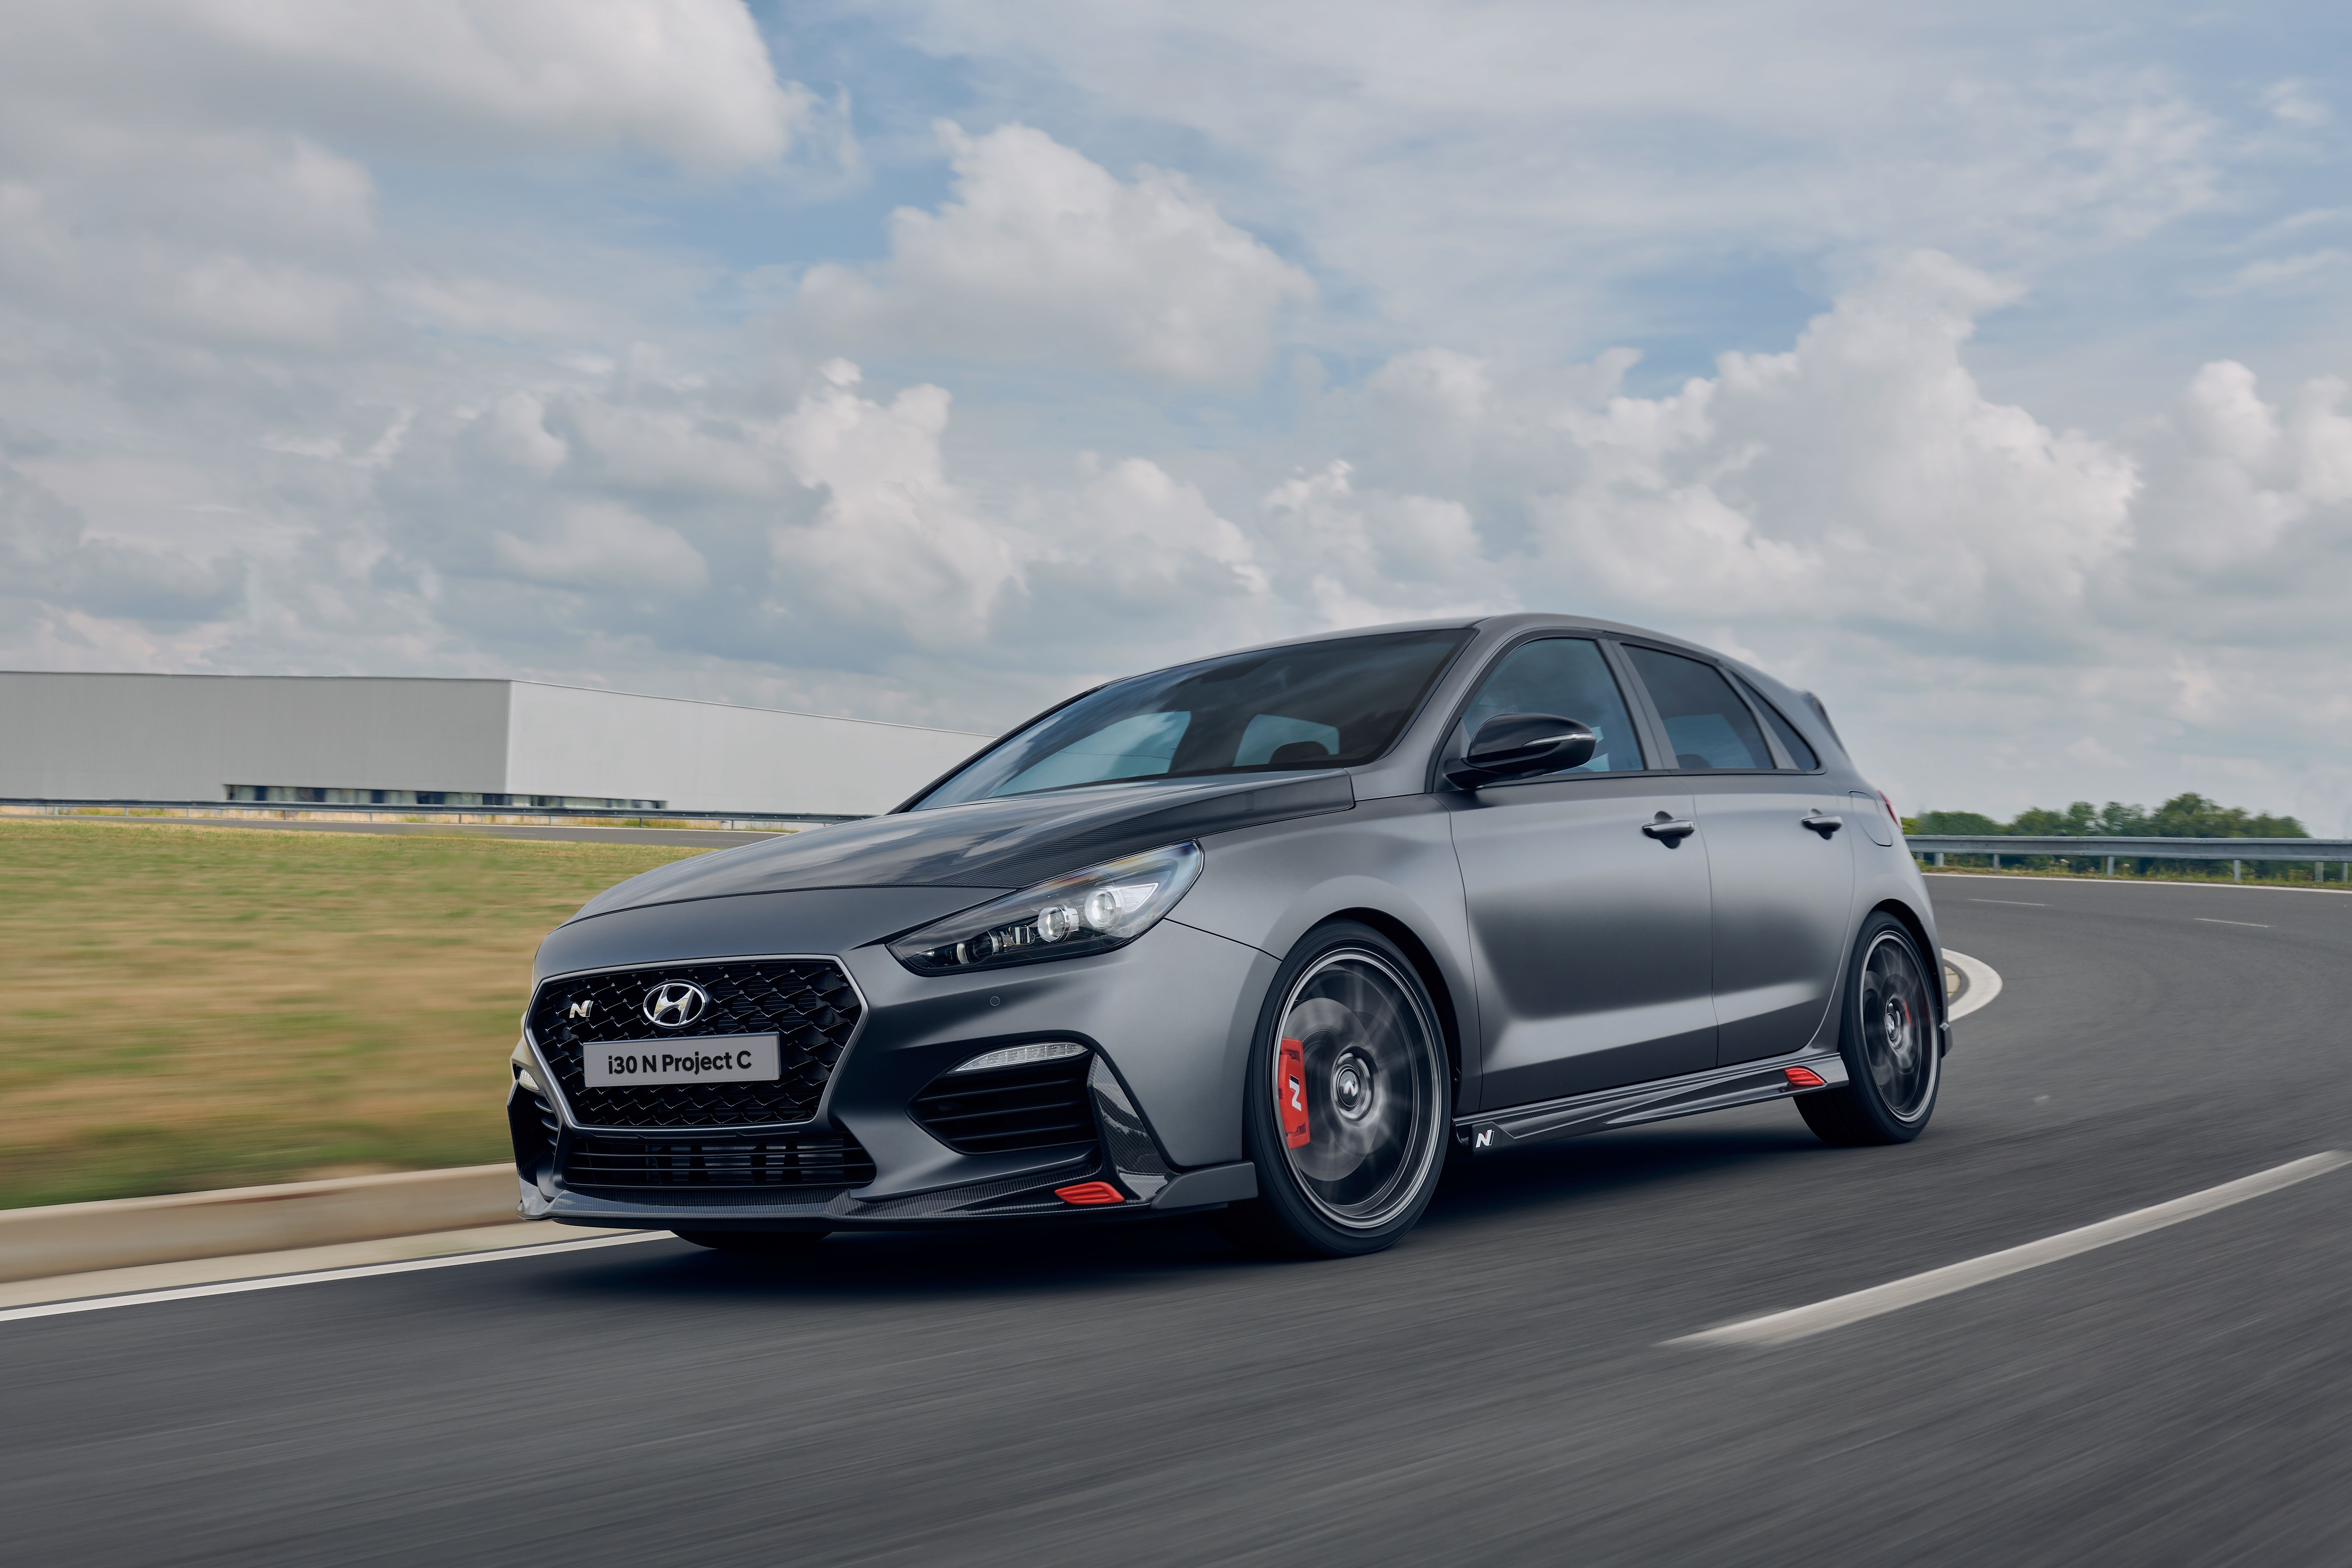 2020 The 2020 Hyundai i30 N Project C Is the Hot Hatch We Deserved From the Beginning